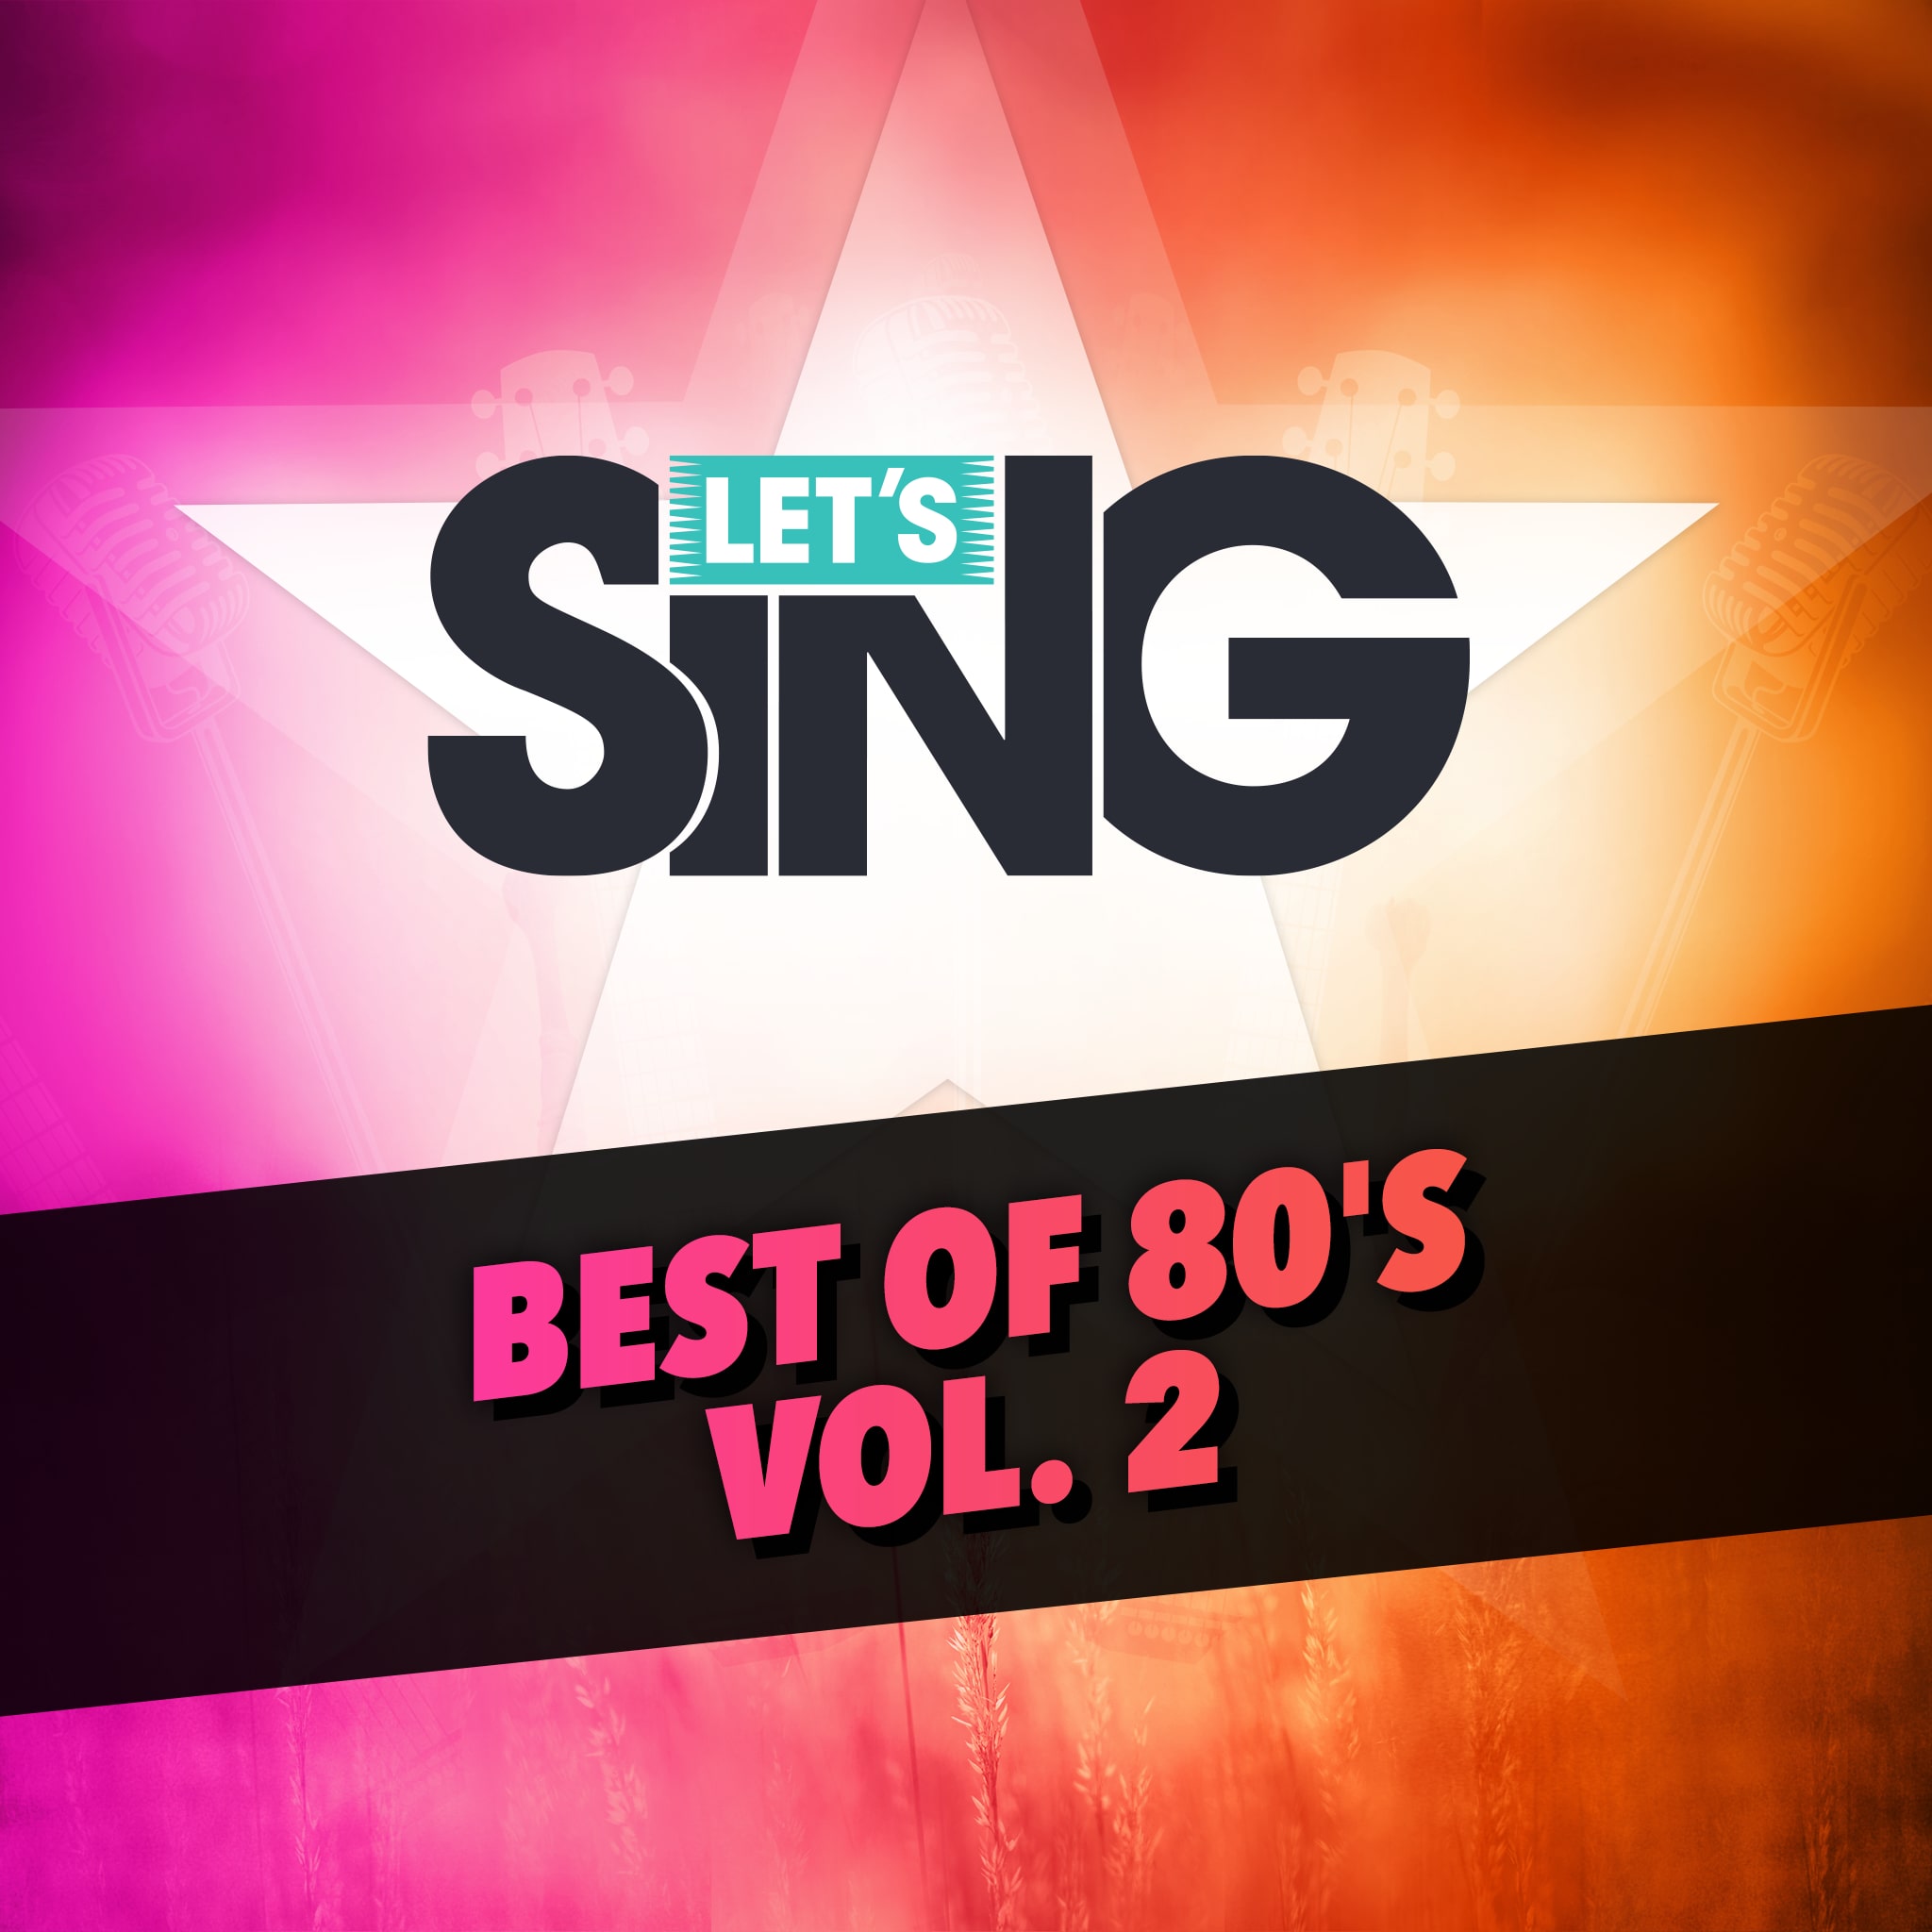 Let's Sing - Best of 80's Vol. 2 Song Pack